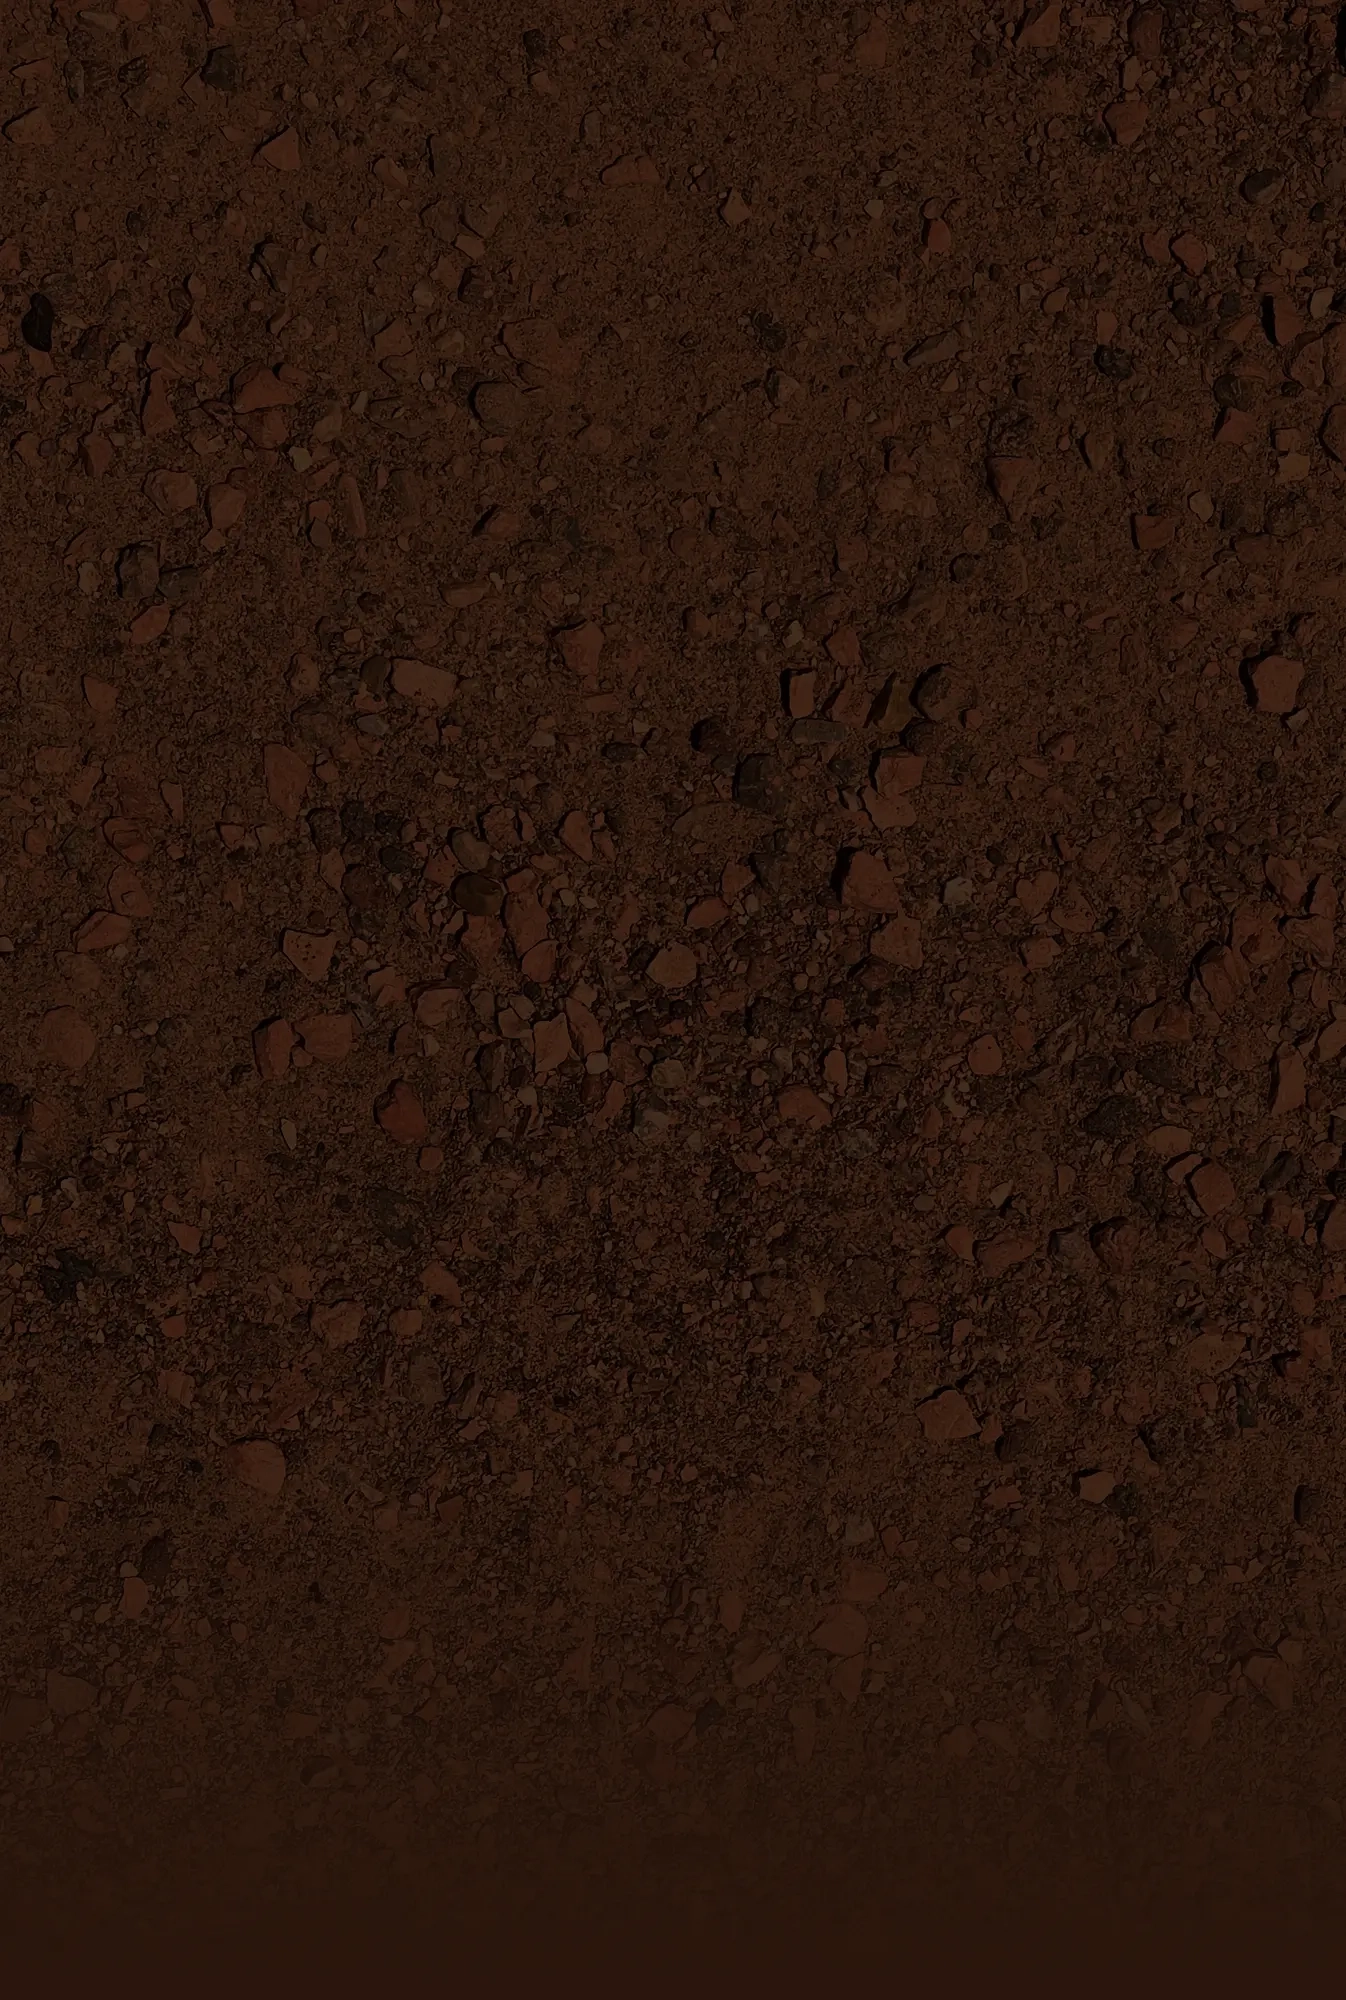 Background showing dark red dirt. It emphasizes how the student is building in a 3D interactive world.